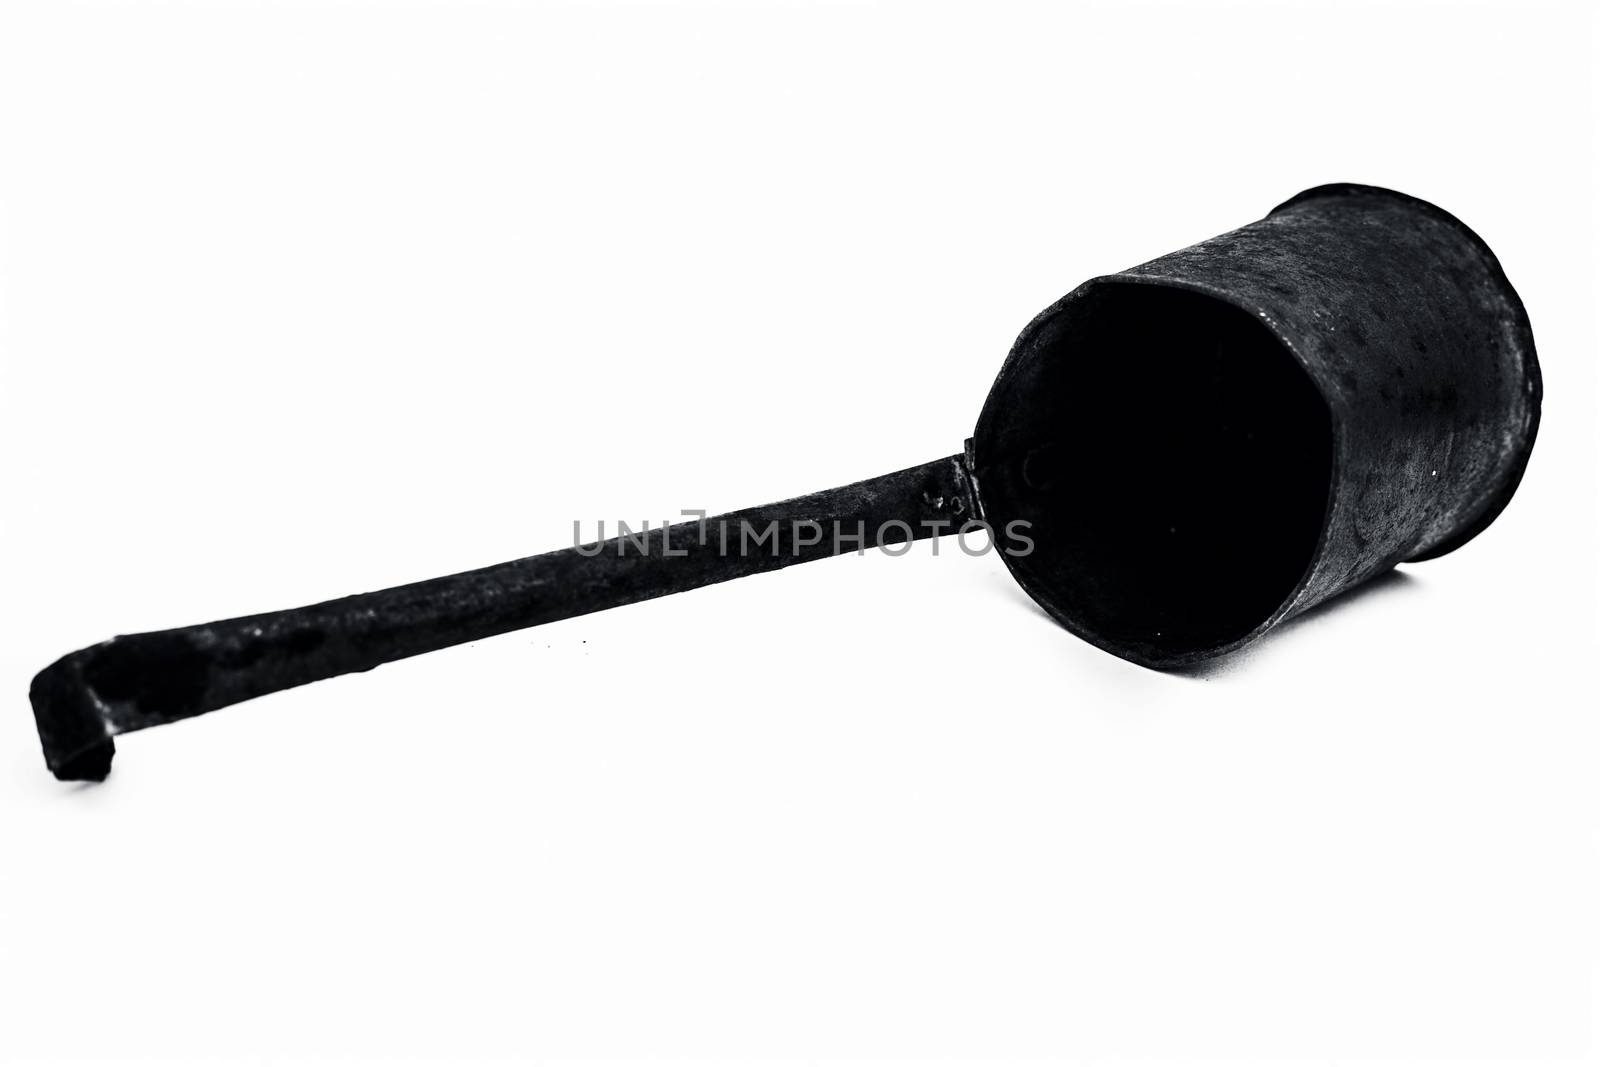 Close up of black colored metal liquid measuring domestic jug or cup isolated on white.